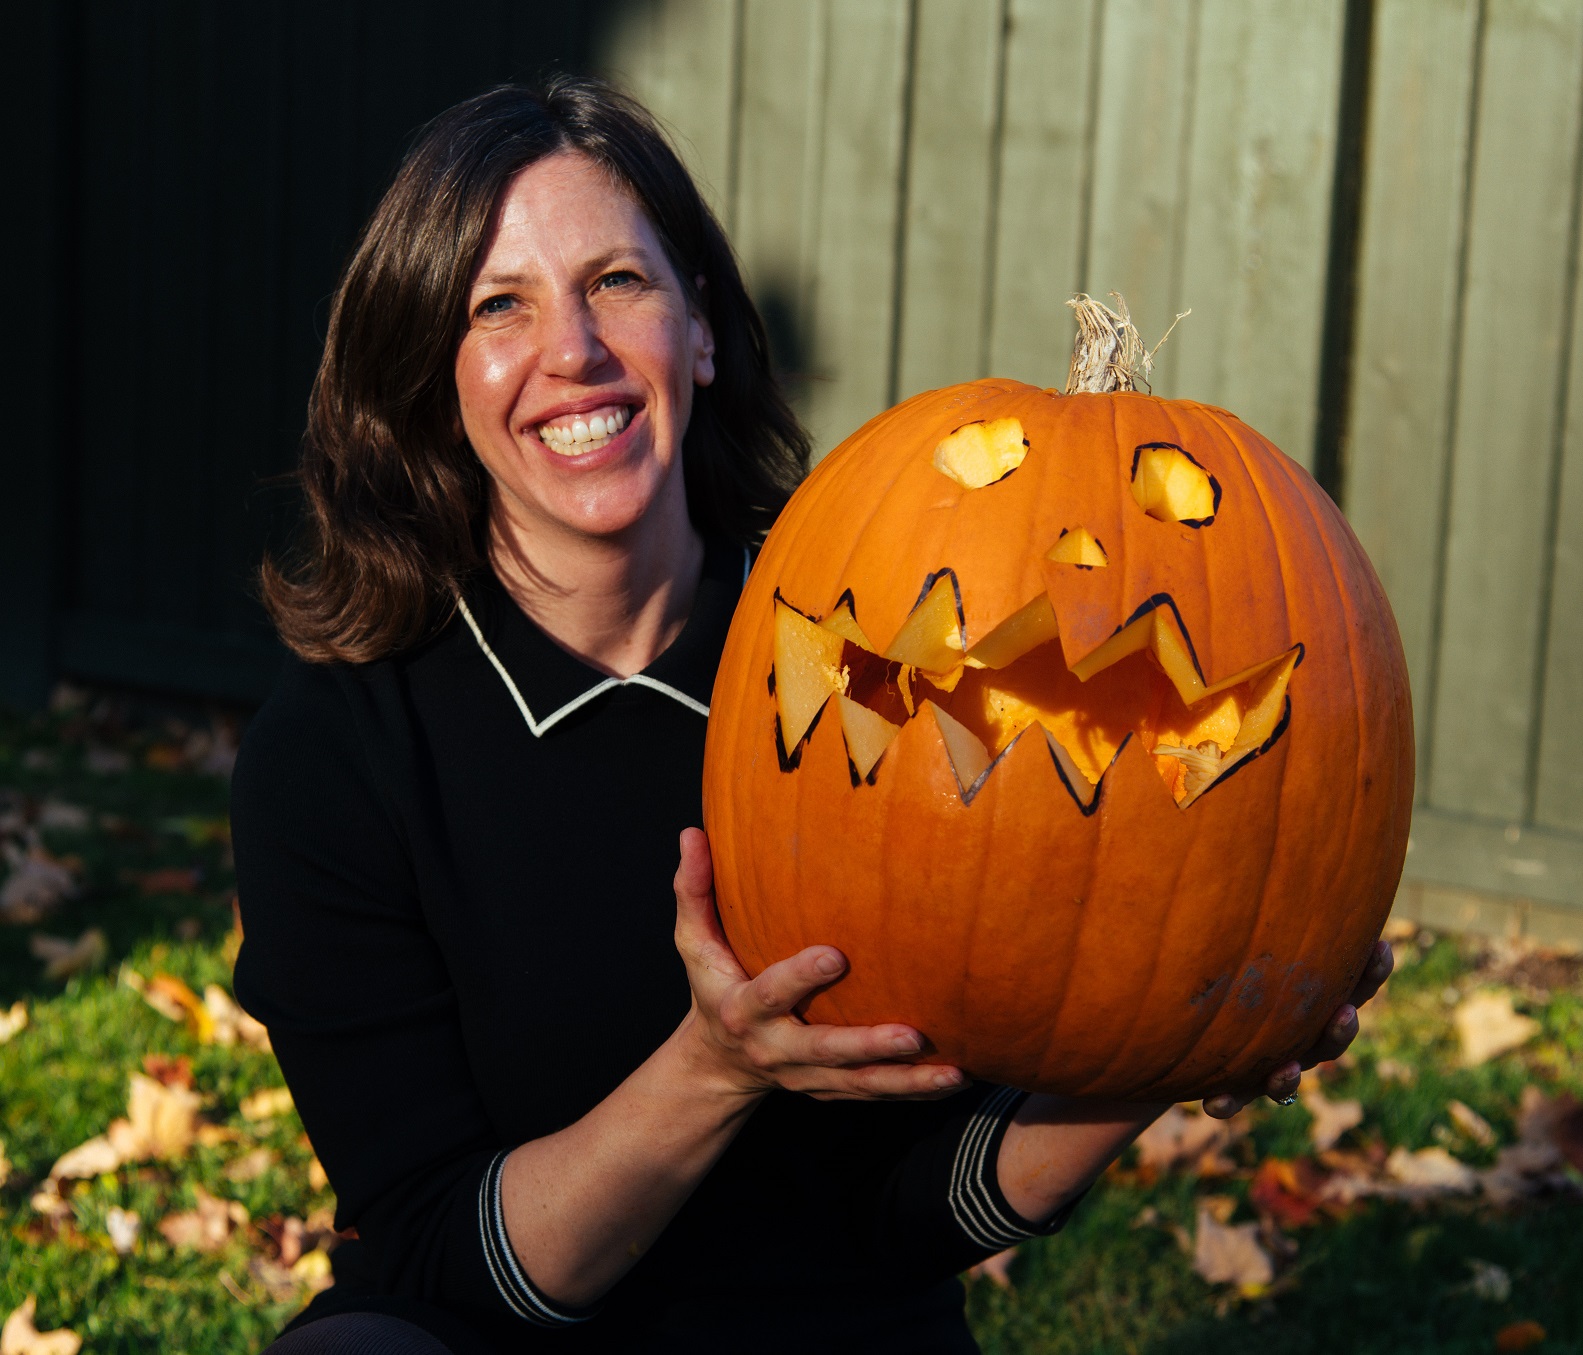 A woman with brown hair wearing a black shirt holds a large carved pumpkin in a yard with leaves on the ground on a sunny day. 